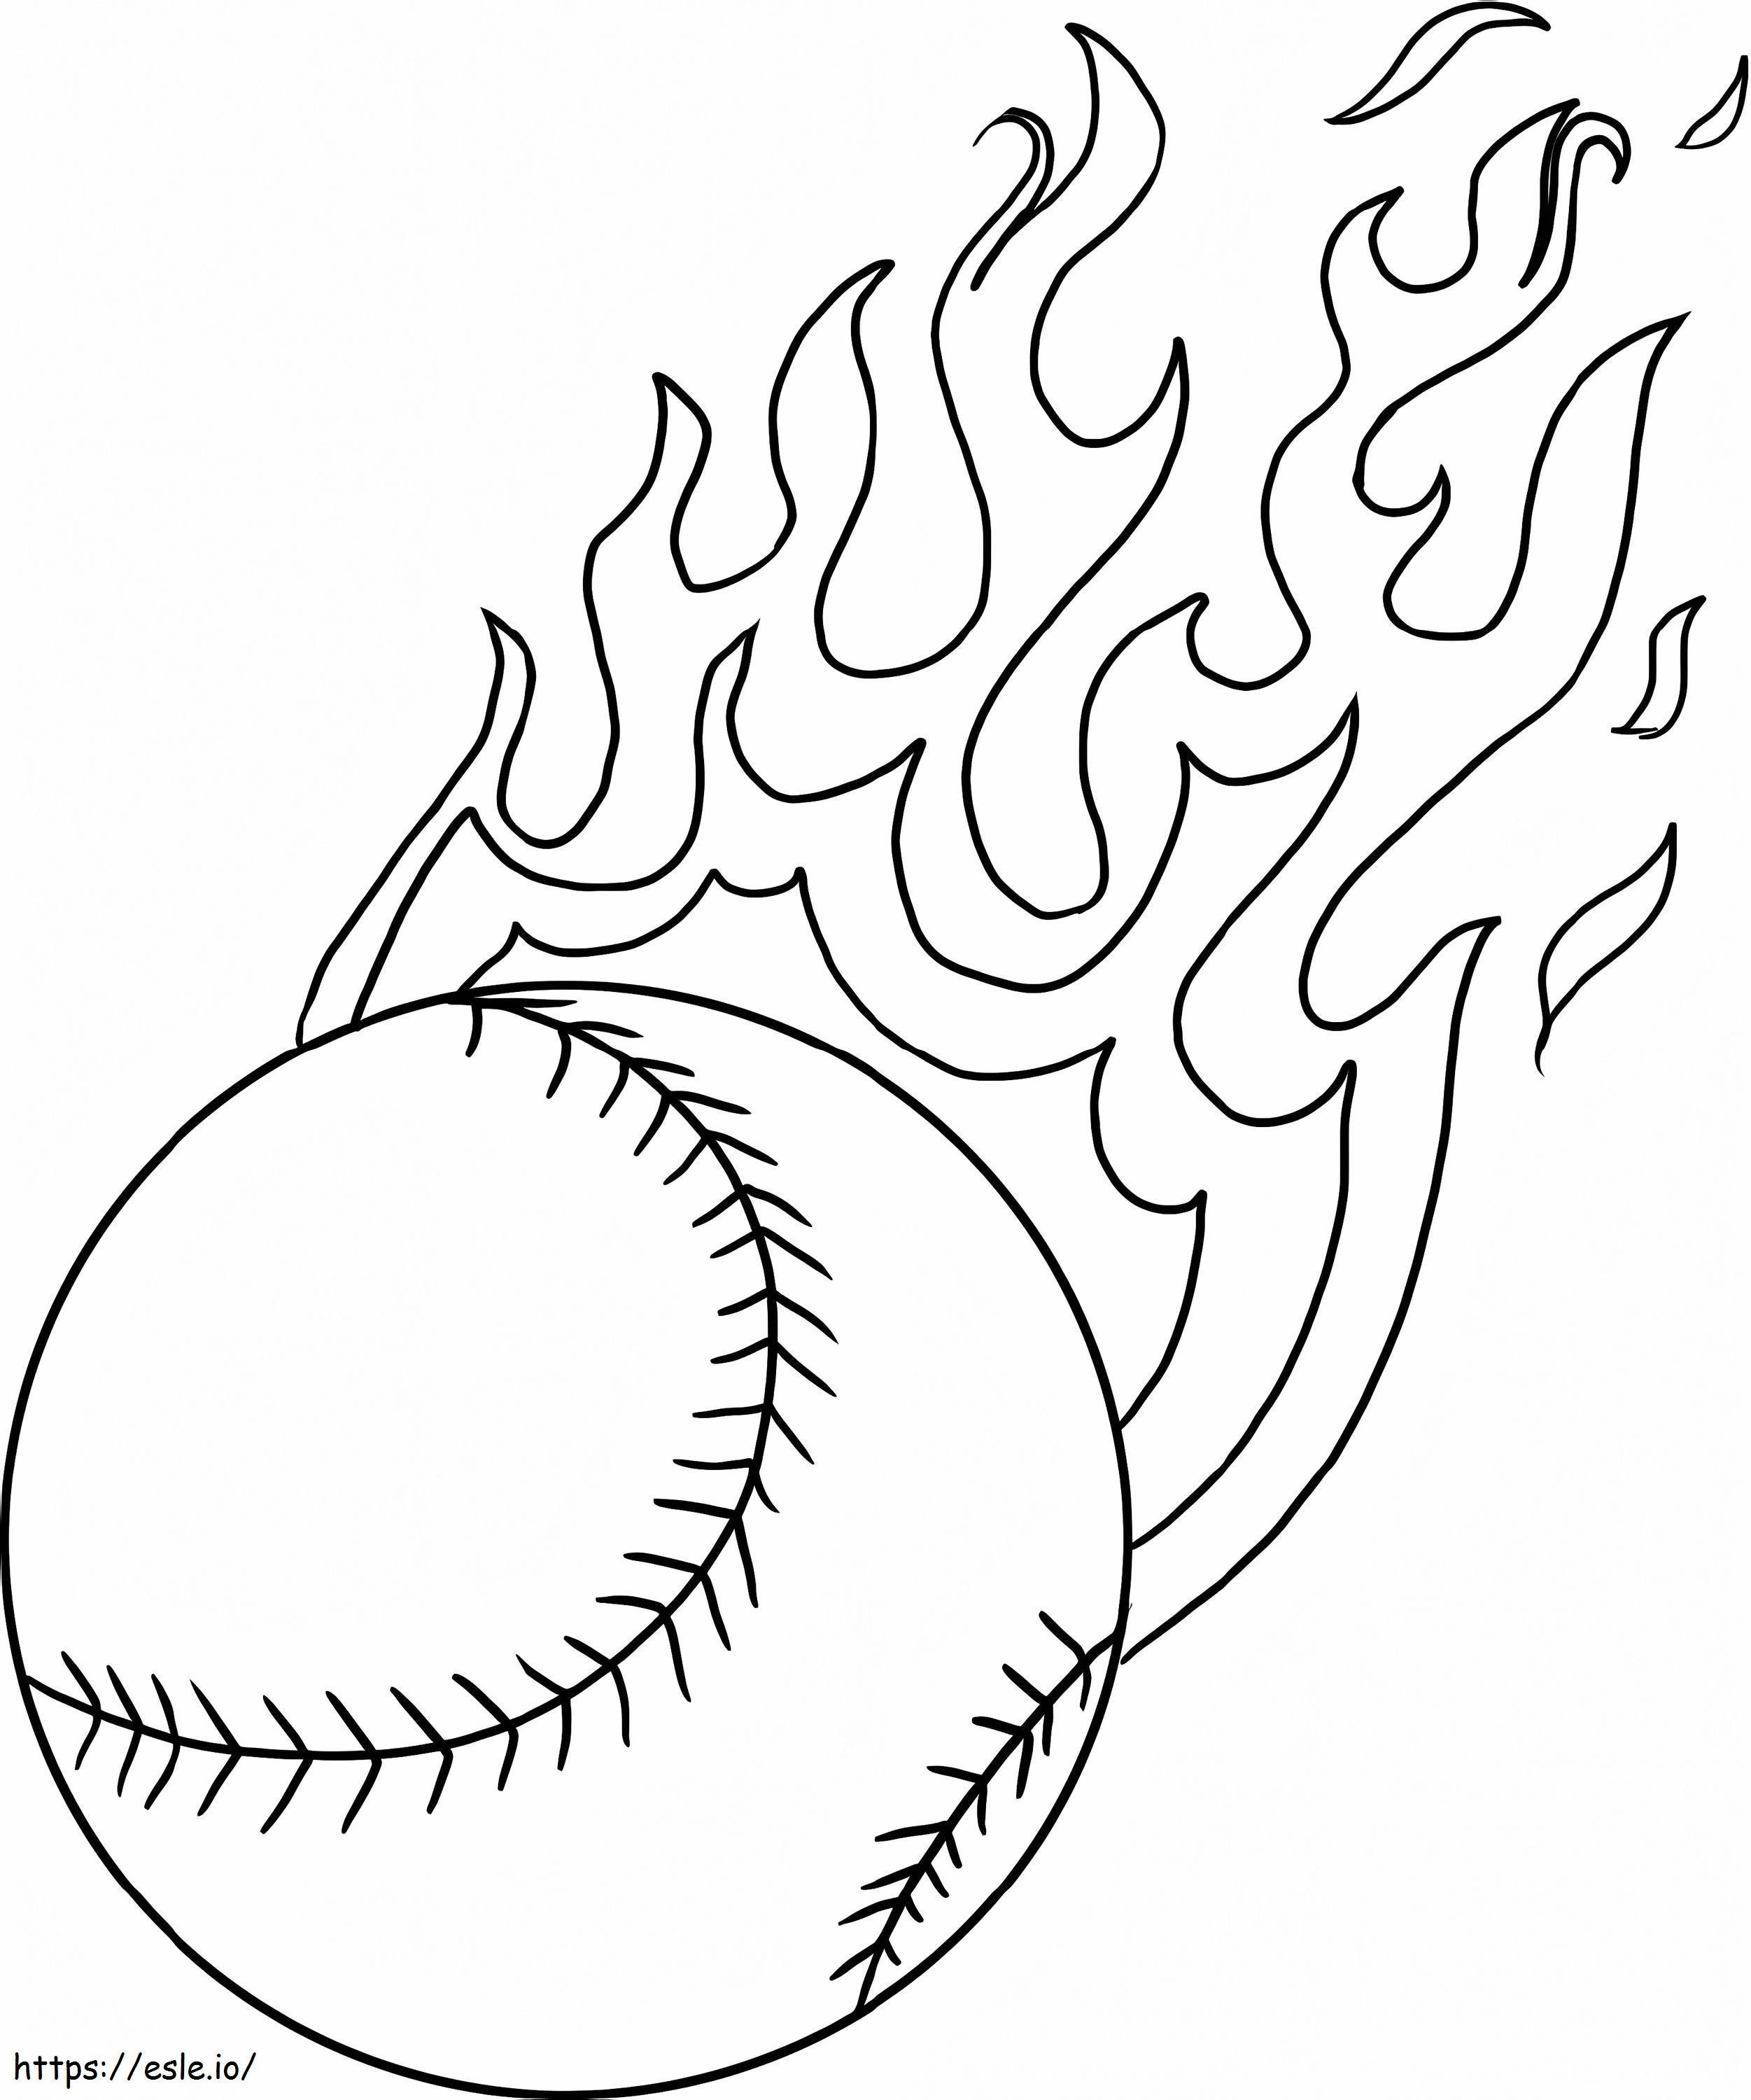 1561777705 Ball On Fire coloring page